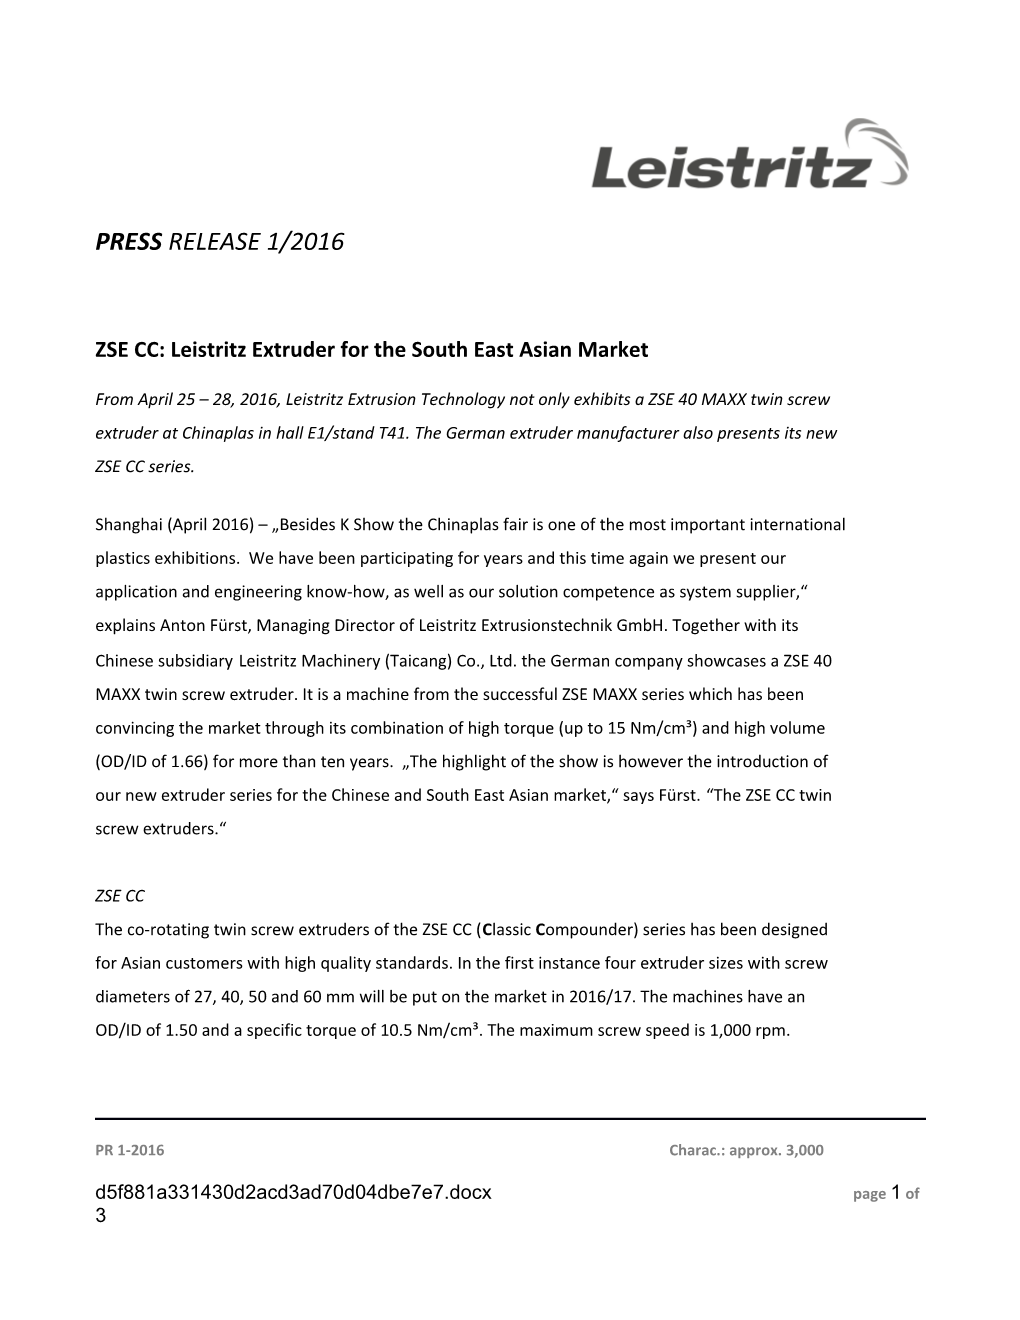 ZSE CC: Leistritz Extruder for Thesouth East Asian Market